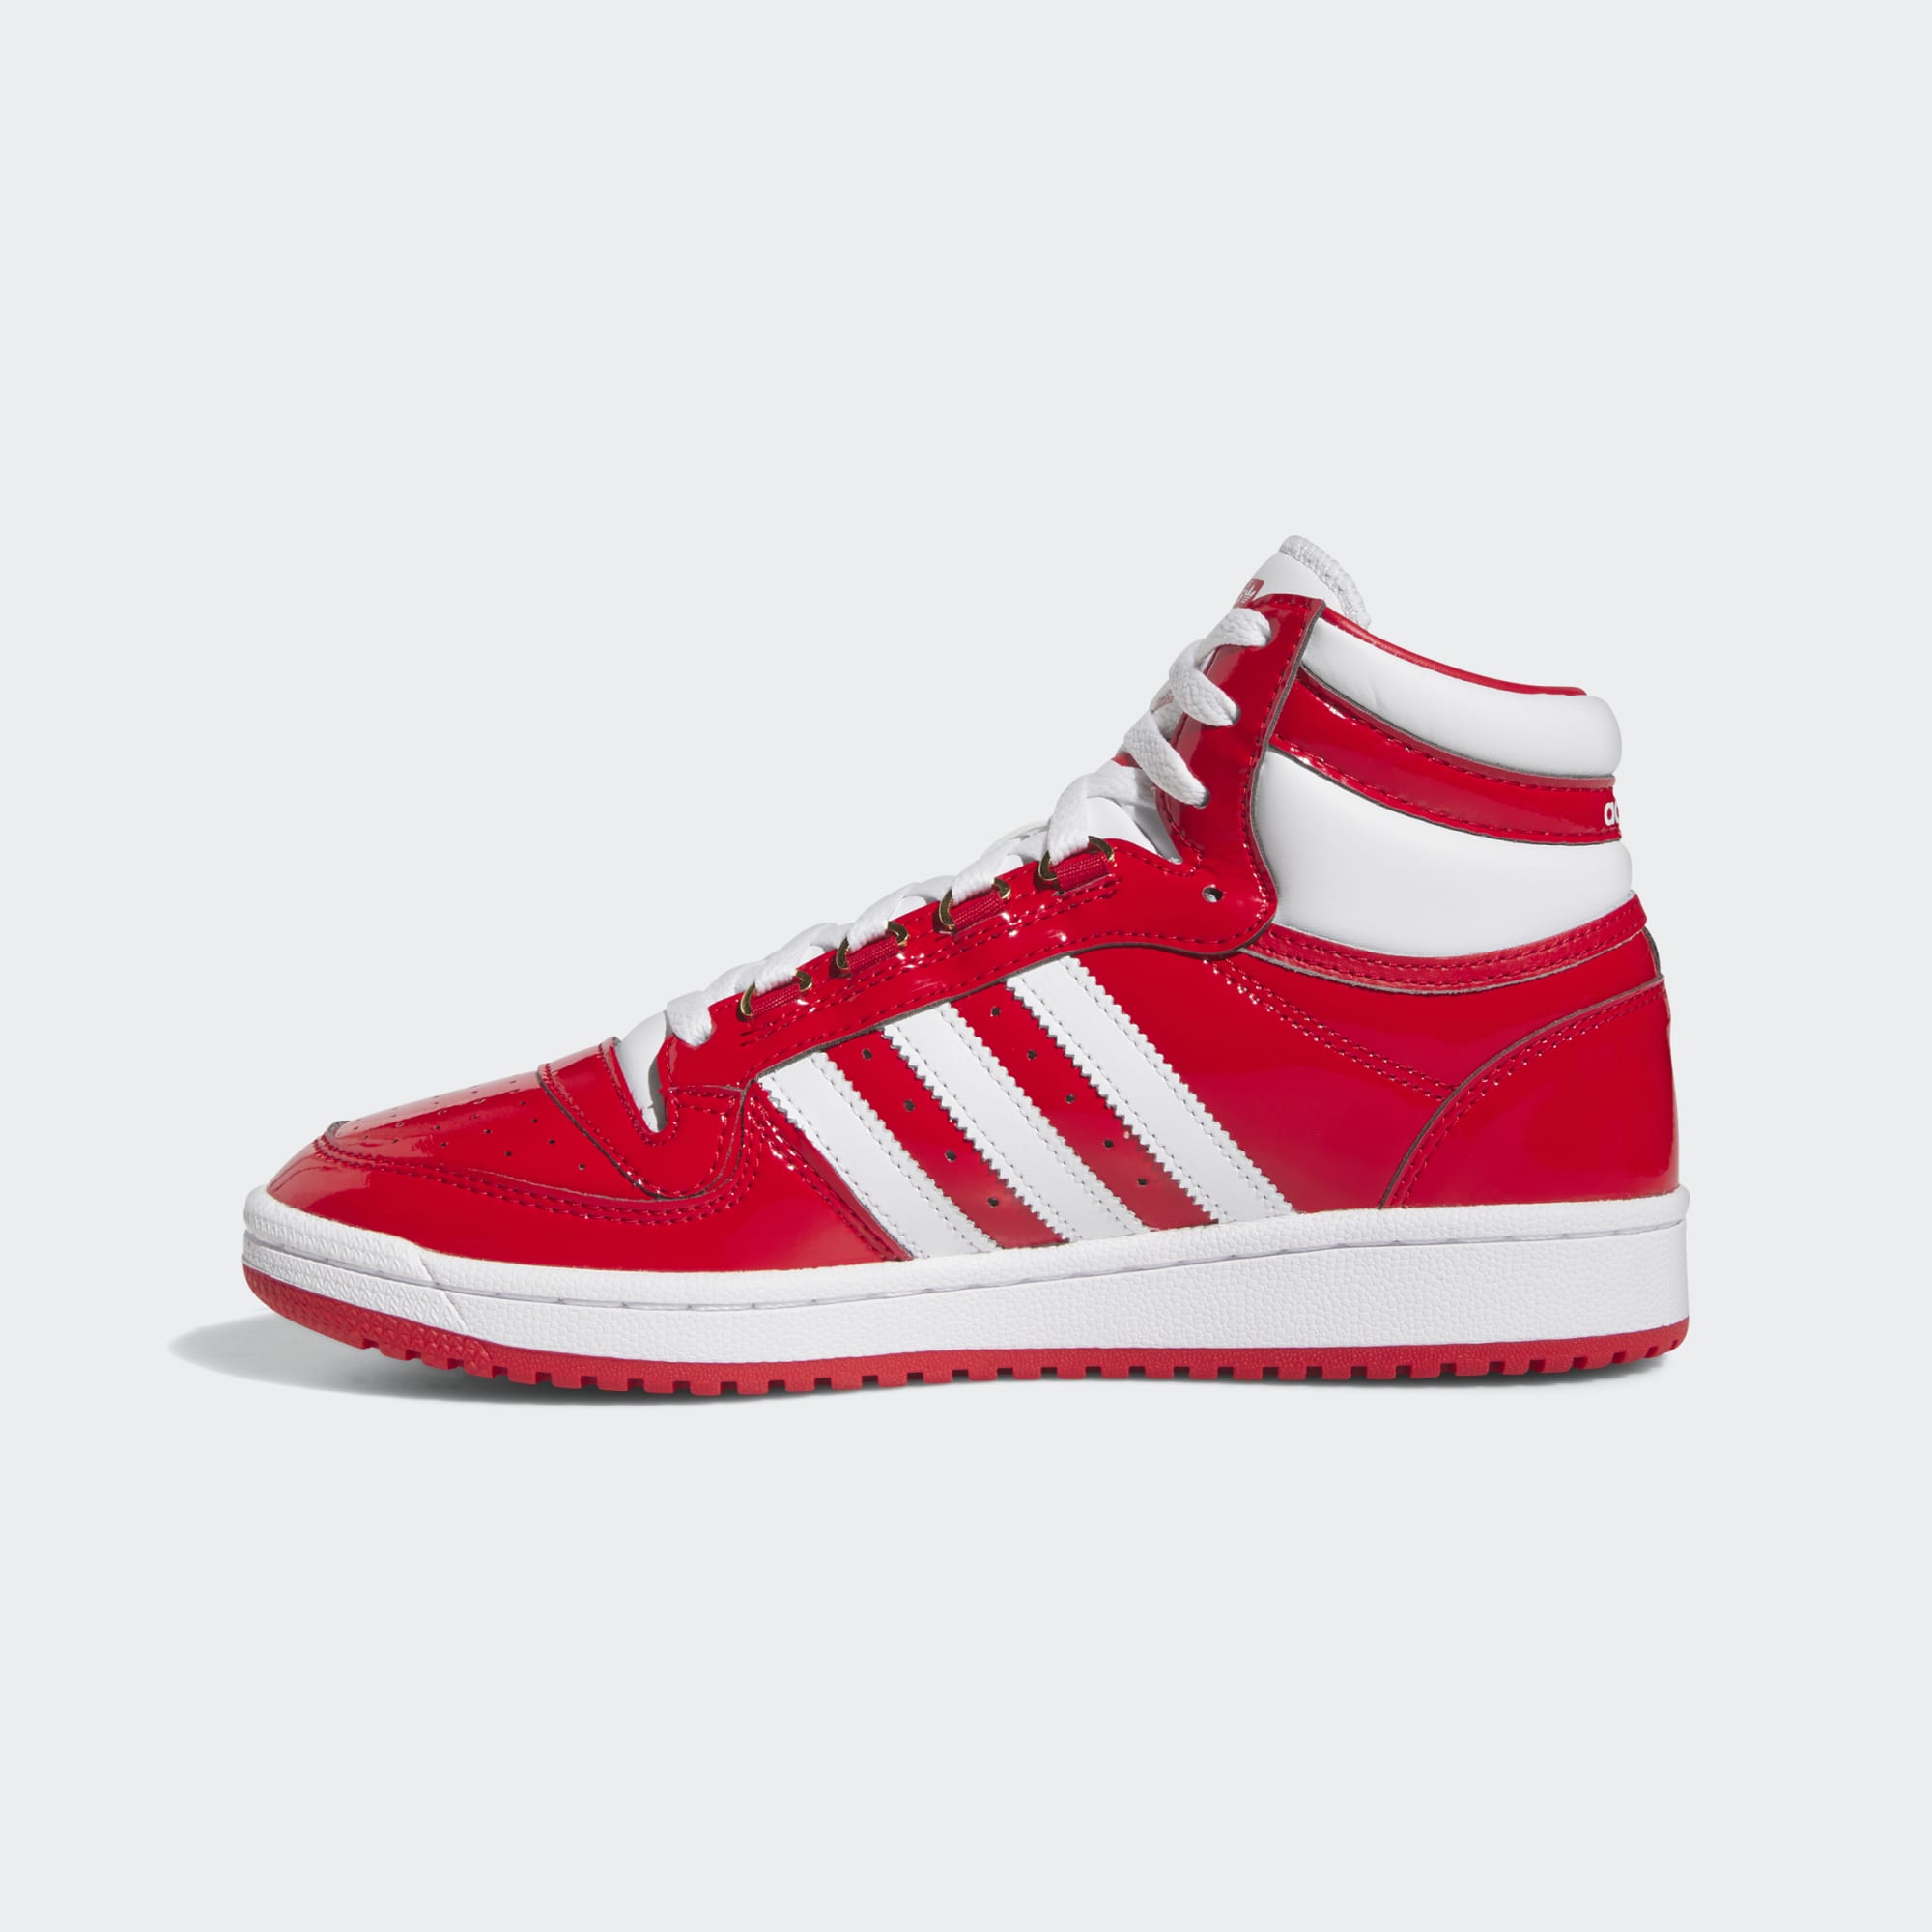 Adidas Top Ten Patent Leather Red White